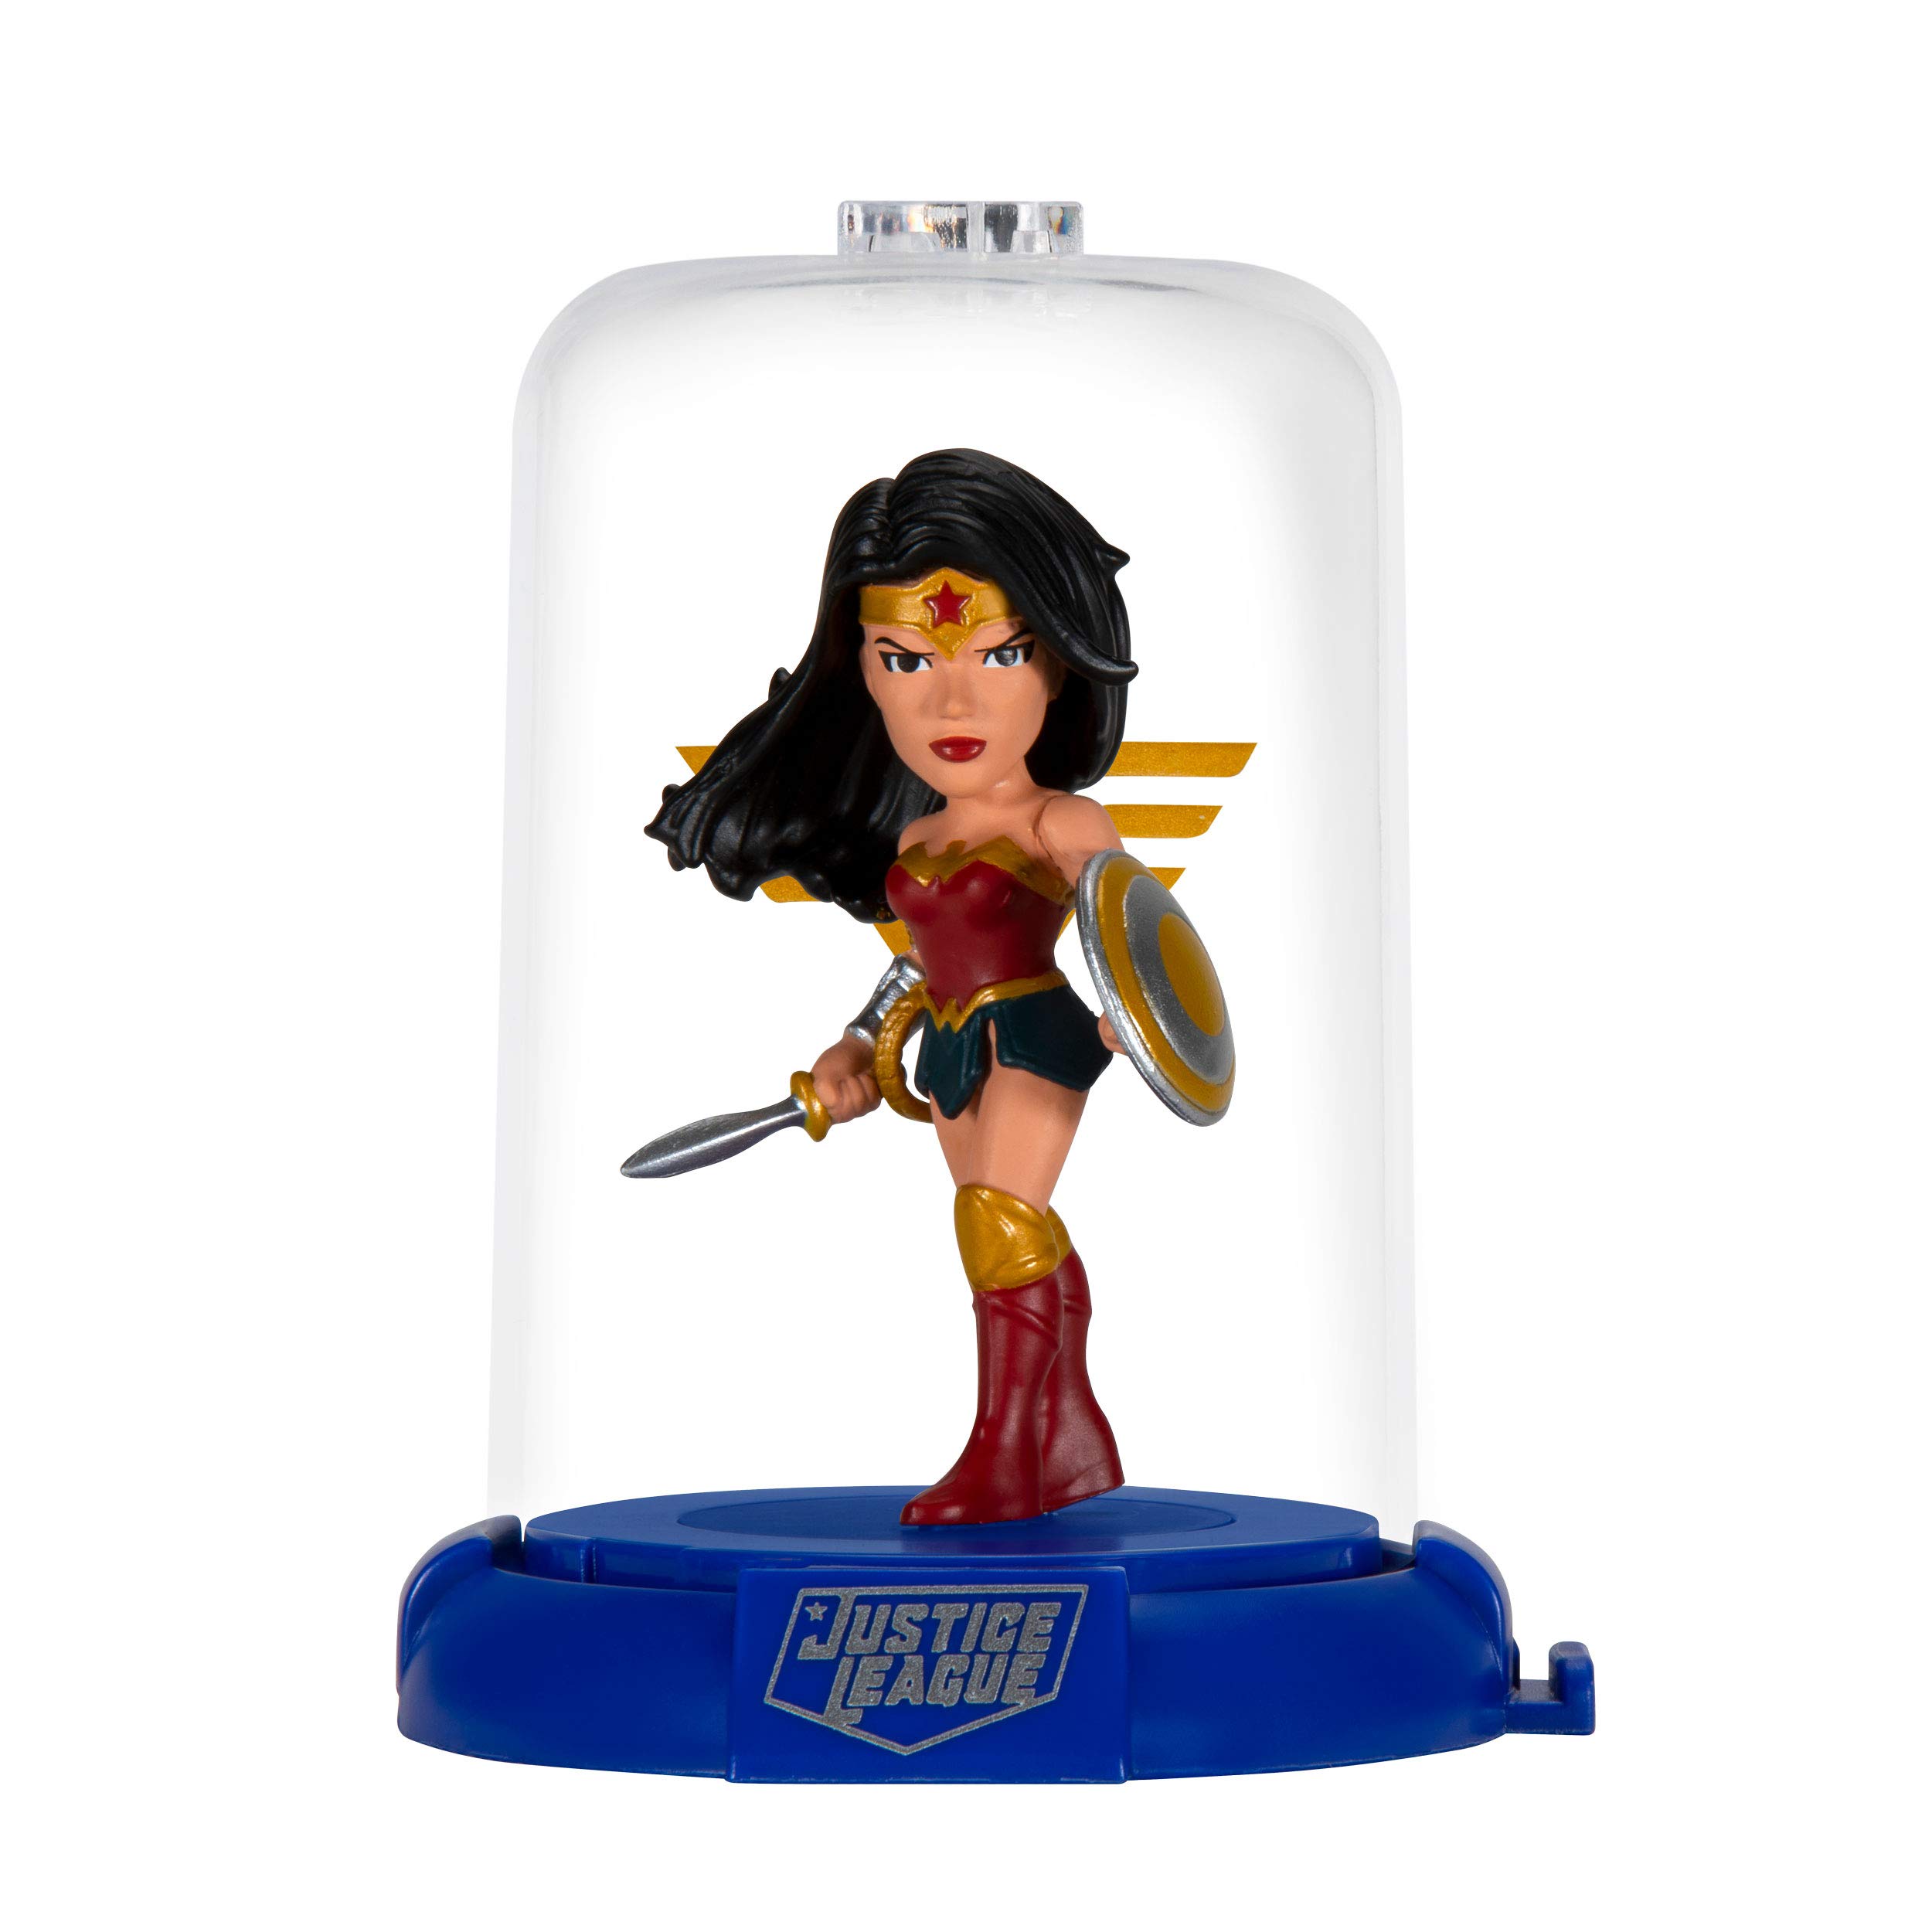 Justice League Domez Series 1 Collector’s Box Set - Includes Batman, Superman, Wonder Woman & The Flash - Authentic & Highly Detailed Collectible Characters - Connect, Collect, Display